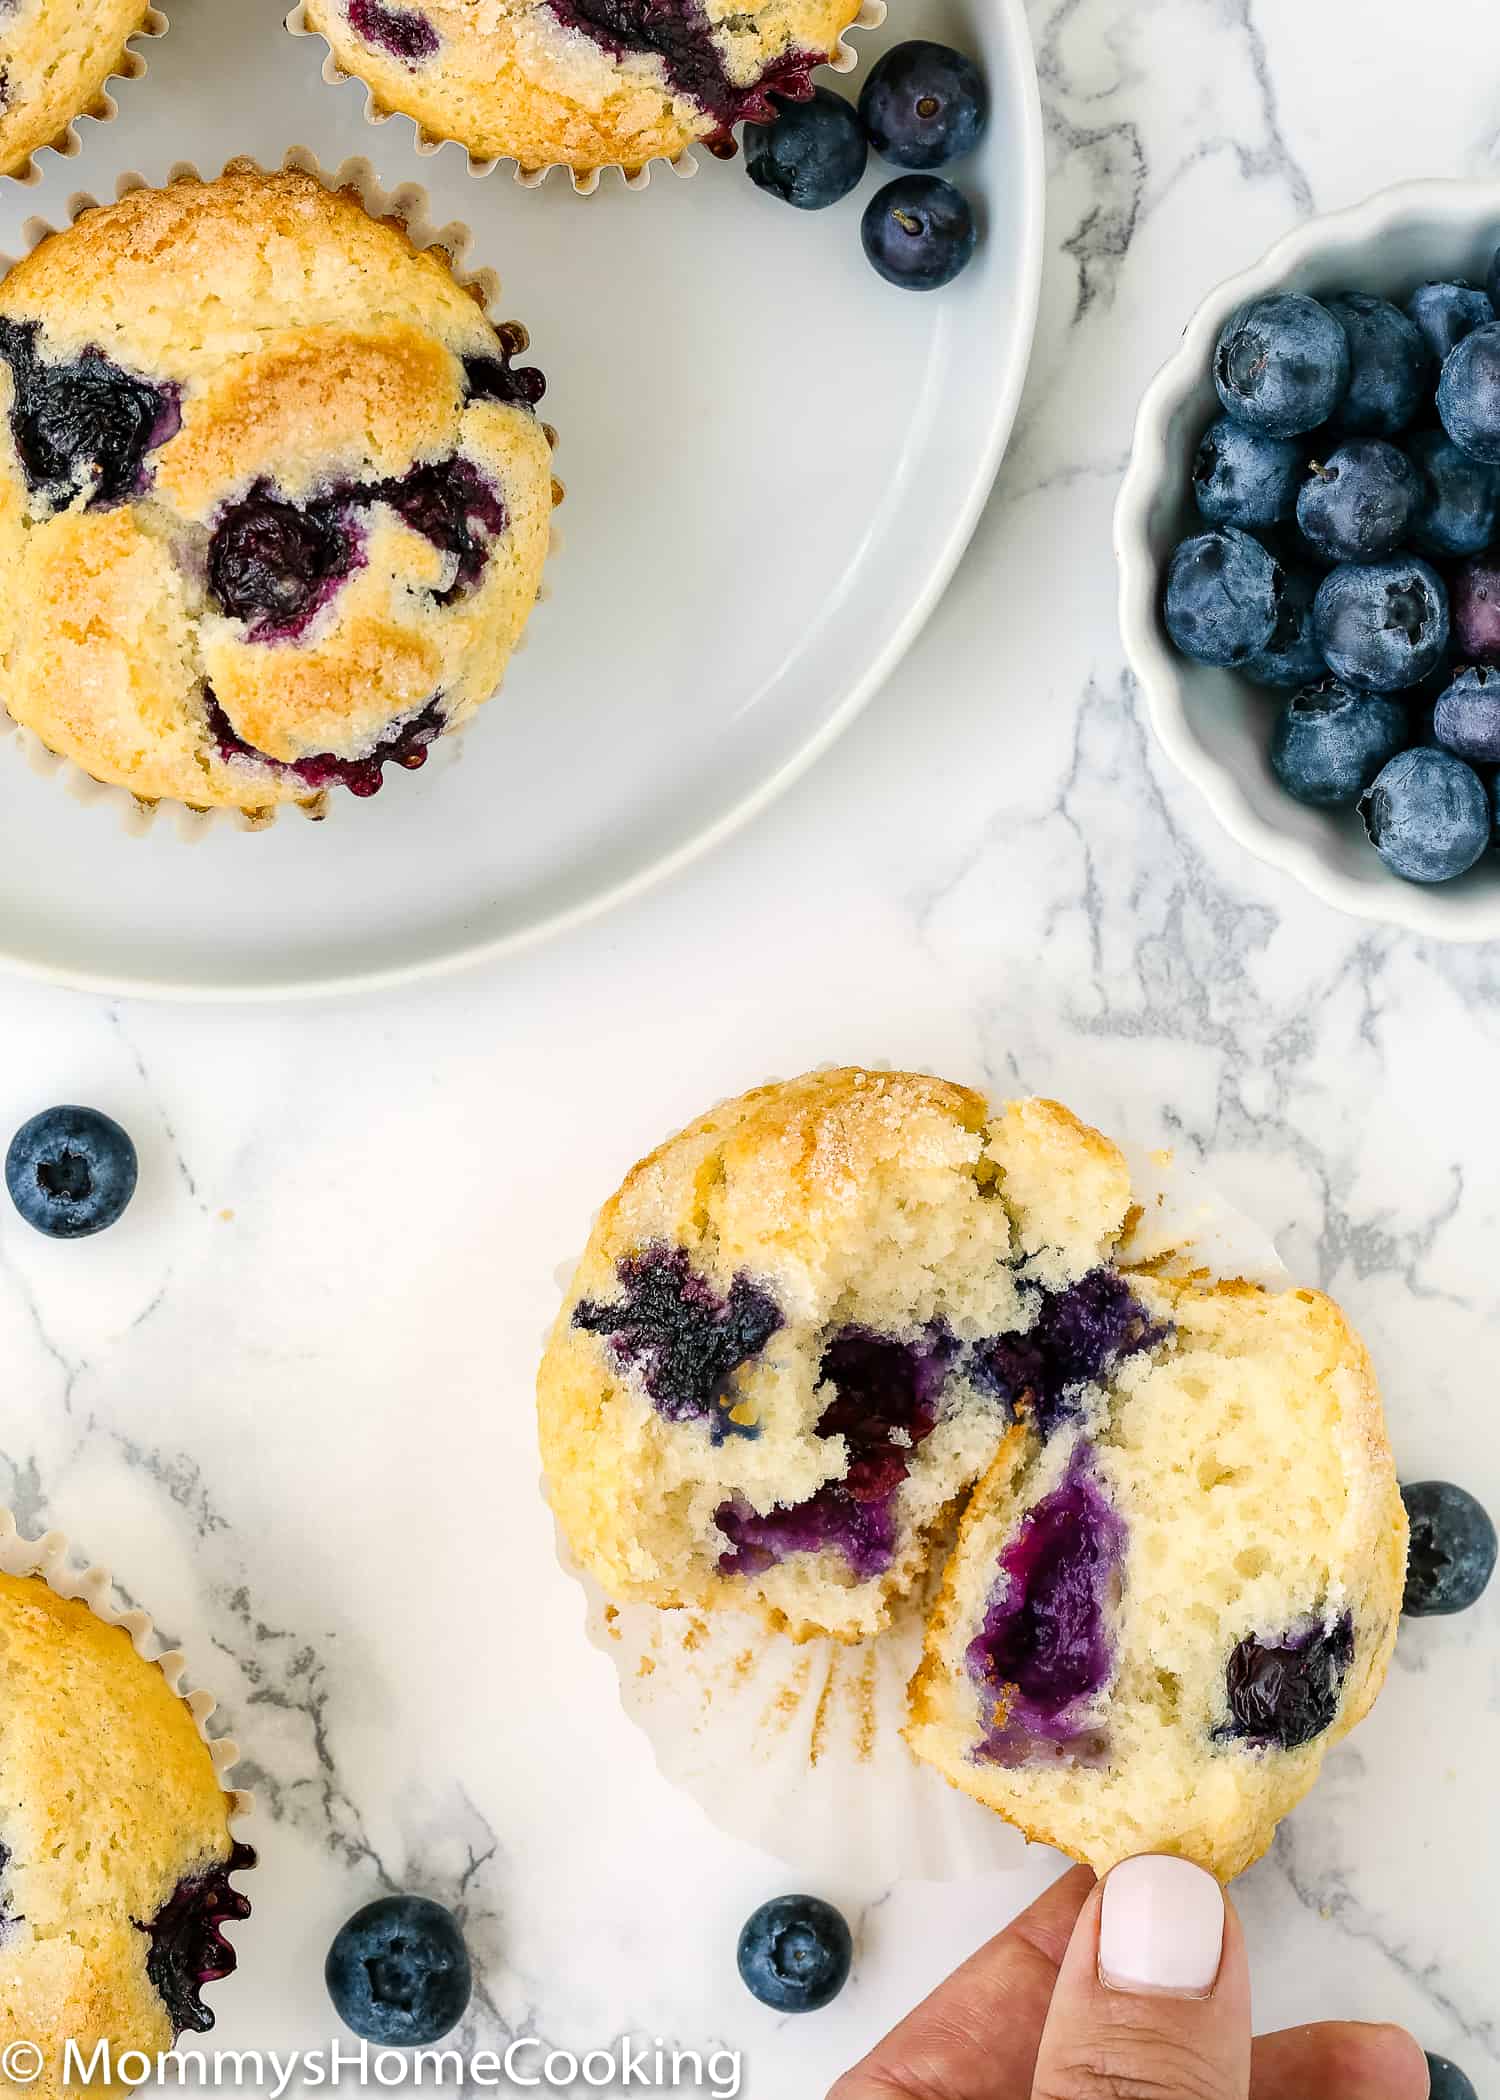 Eggless Blueberry Muffins cut open showing the fluffy inside texture.